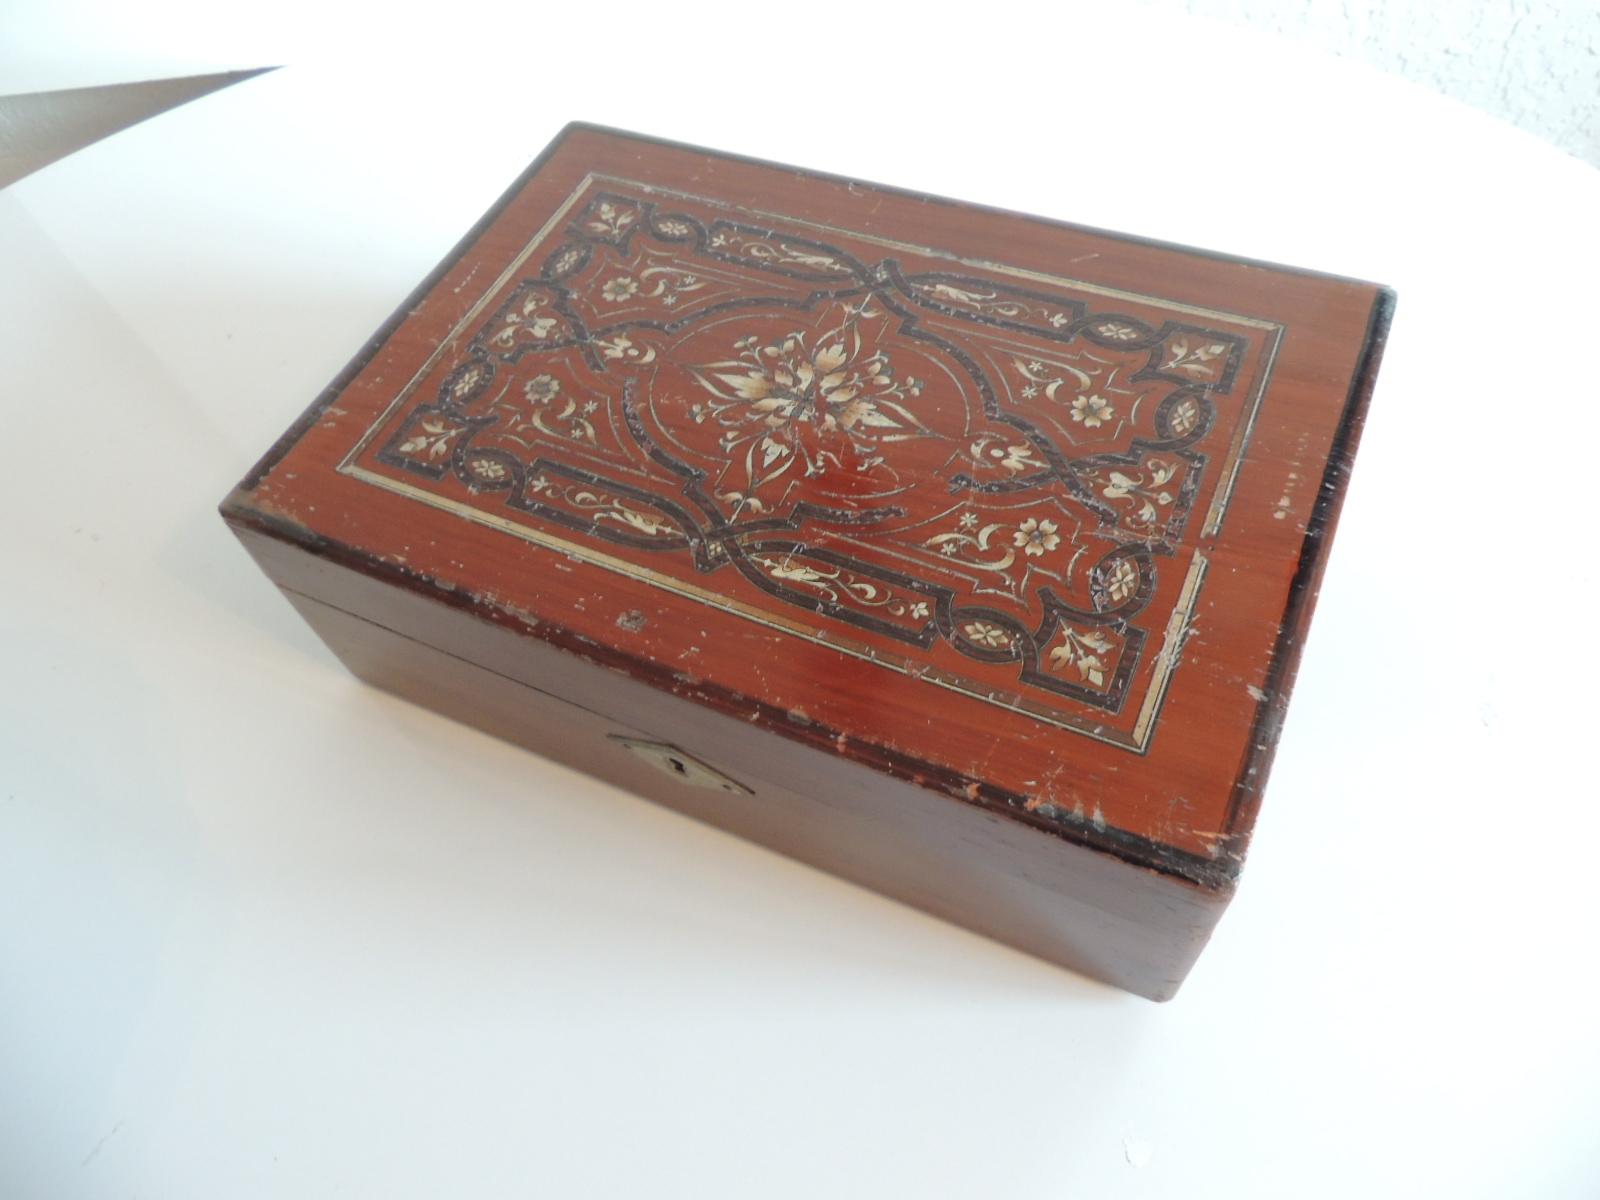 Regency Large Antique Inlaid Style Jewelry or Decorative Box